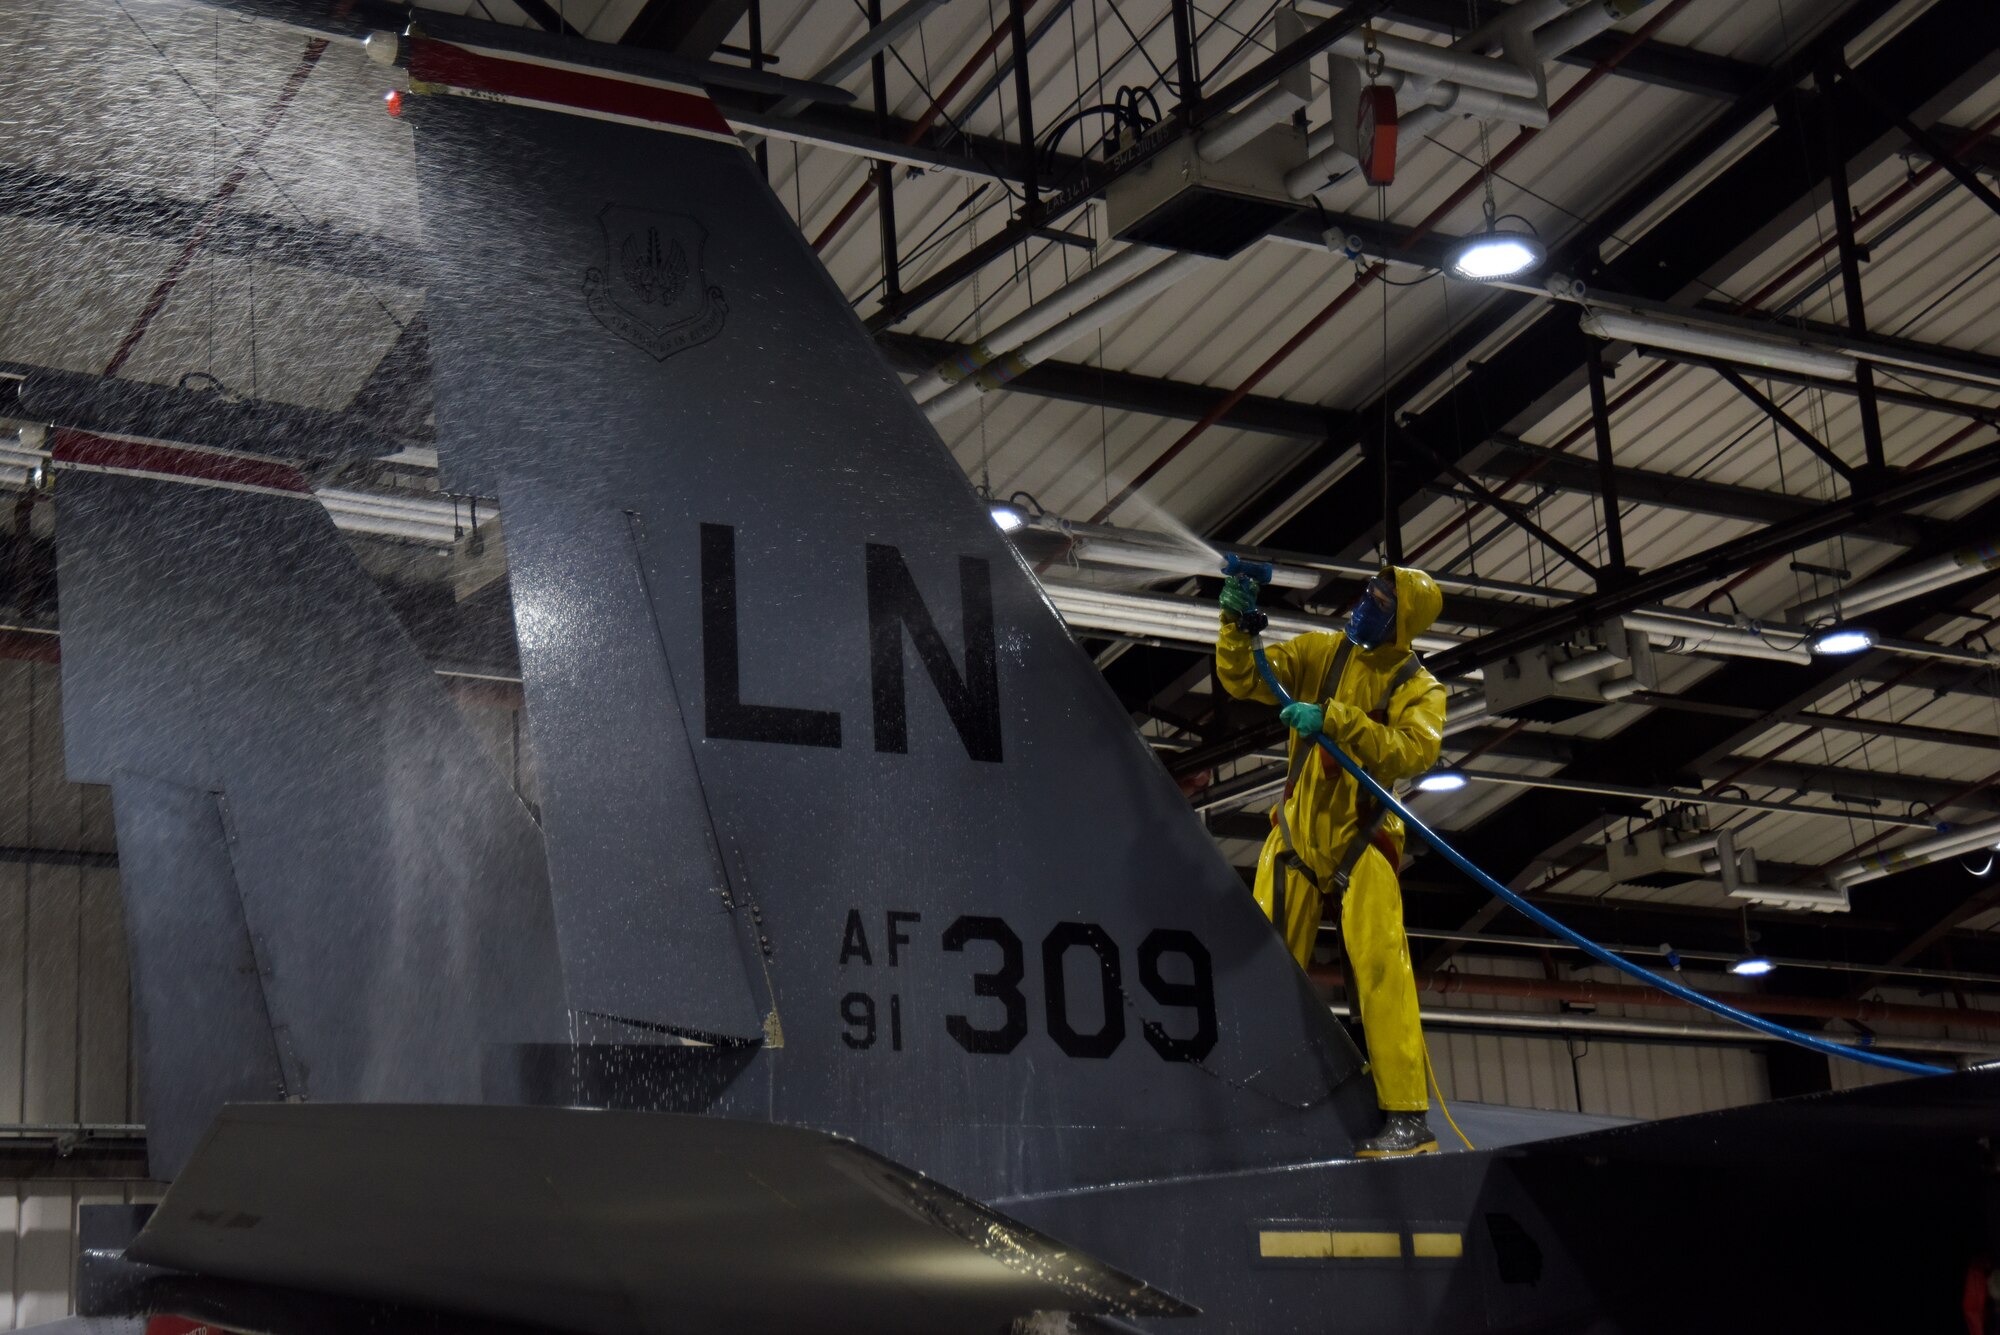 A 494th Aircraft Maintenance Unit crew chief sprays water on a 494th Fighter Squadron F-15E Strike Eagle at Royal Air Force Lakenheath, England, March 13. All Liberty Wing F-15s are washed regularly to keep them in top shape and able to provide worldwide responsive airpower and support. (U.S. Air Force photo/Senior Airman Abby L. Finkel)